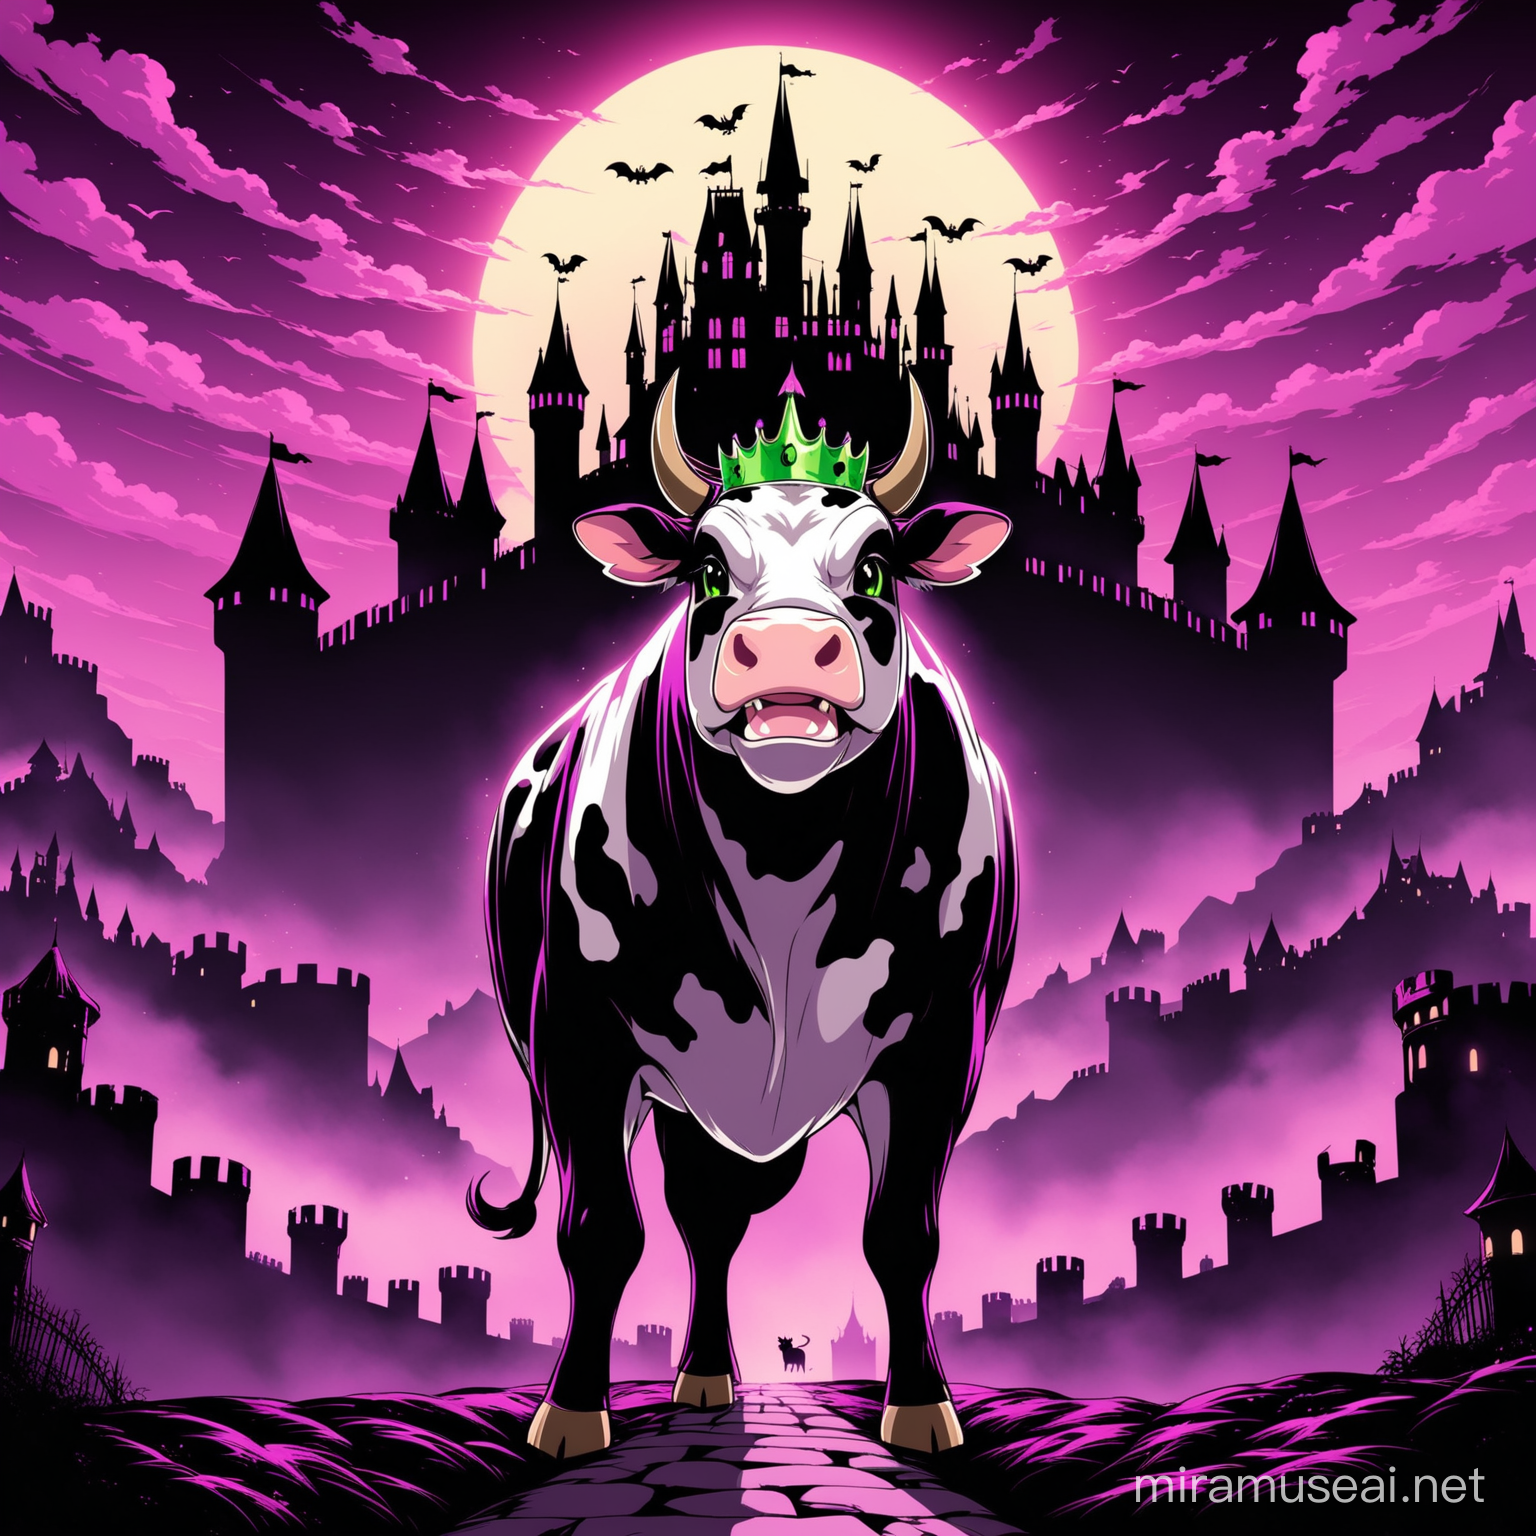 Cow-Dragon 
appreance-scary/full body/noir puprle/green/pink/pointed-teeth/cow-head/
background-sky/noir/castle/princess